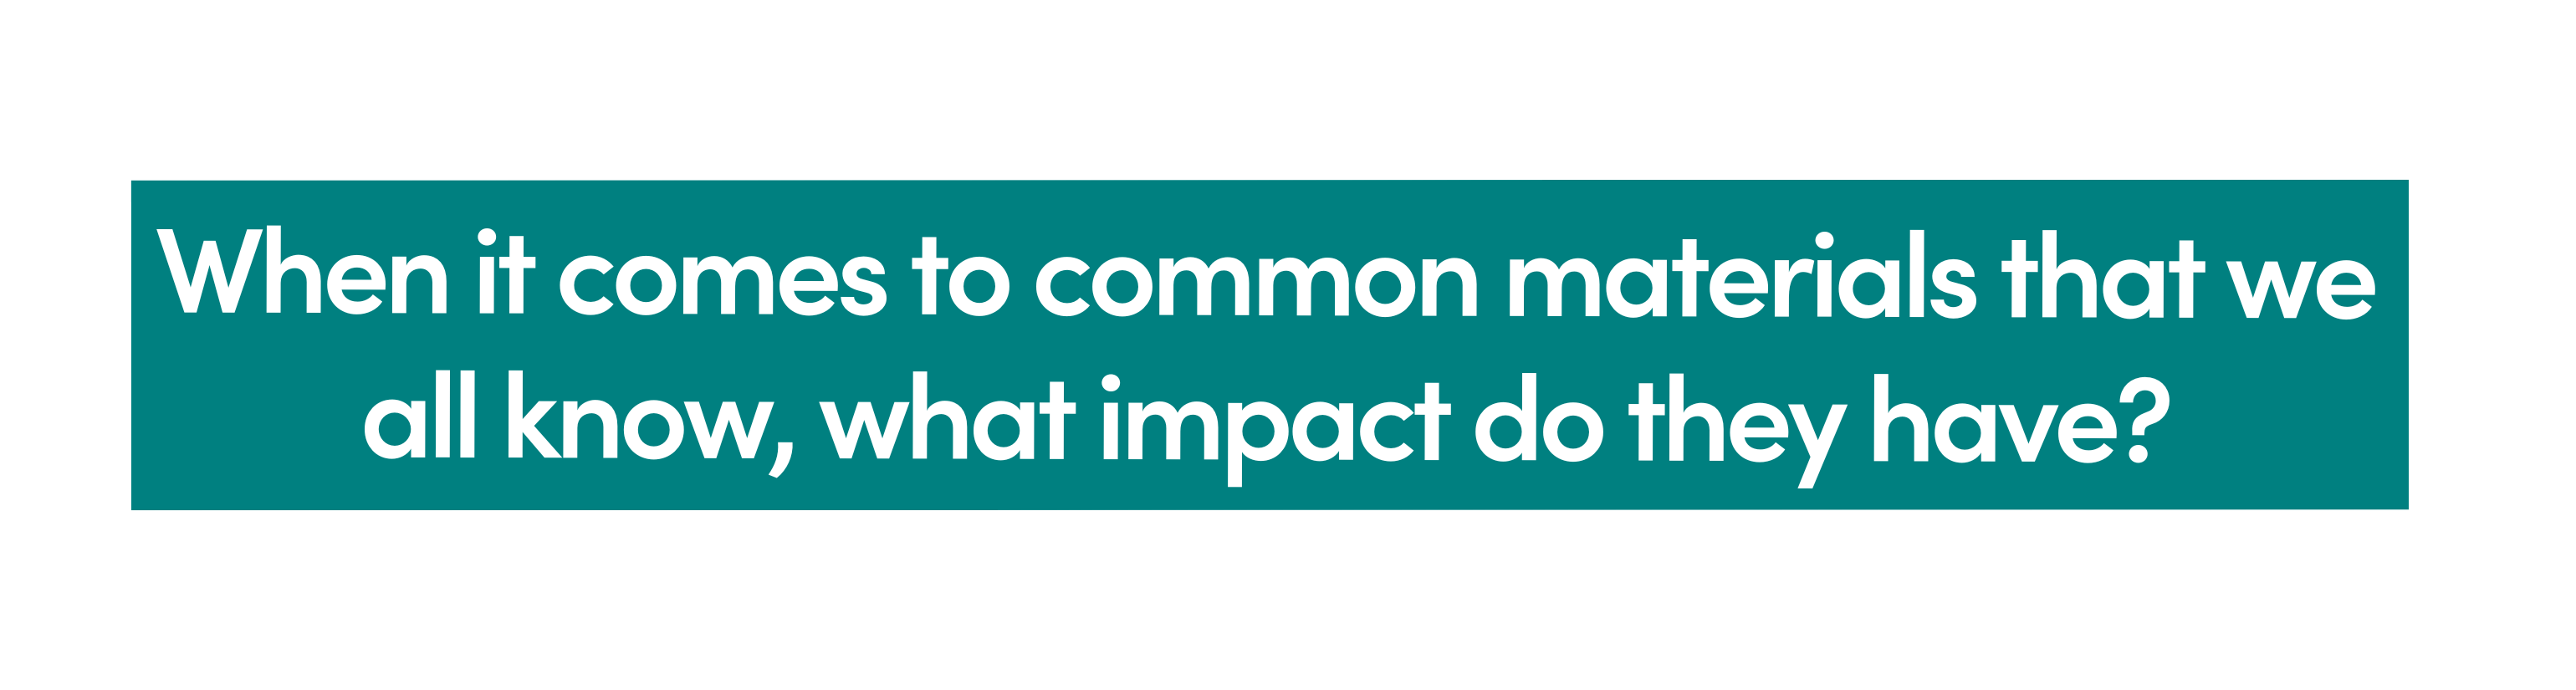 When it comes to common materials that we all know, what impact do they have?